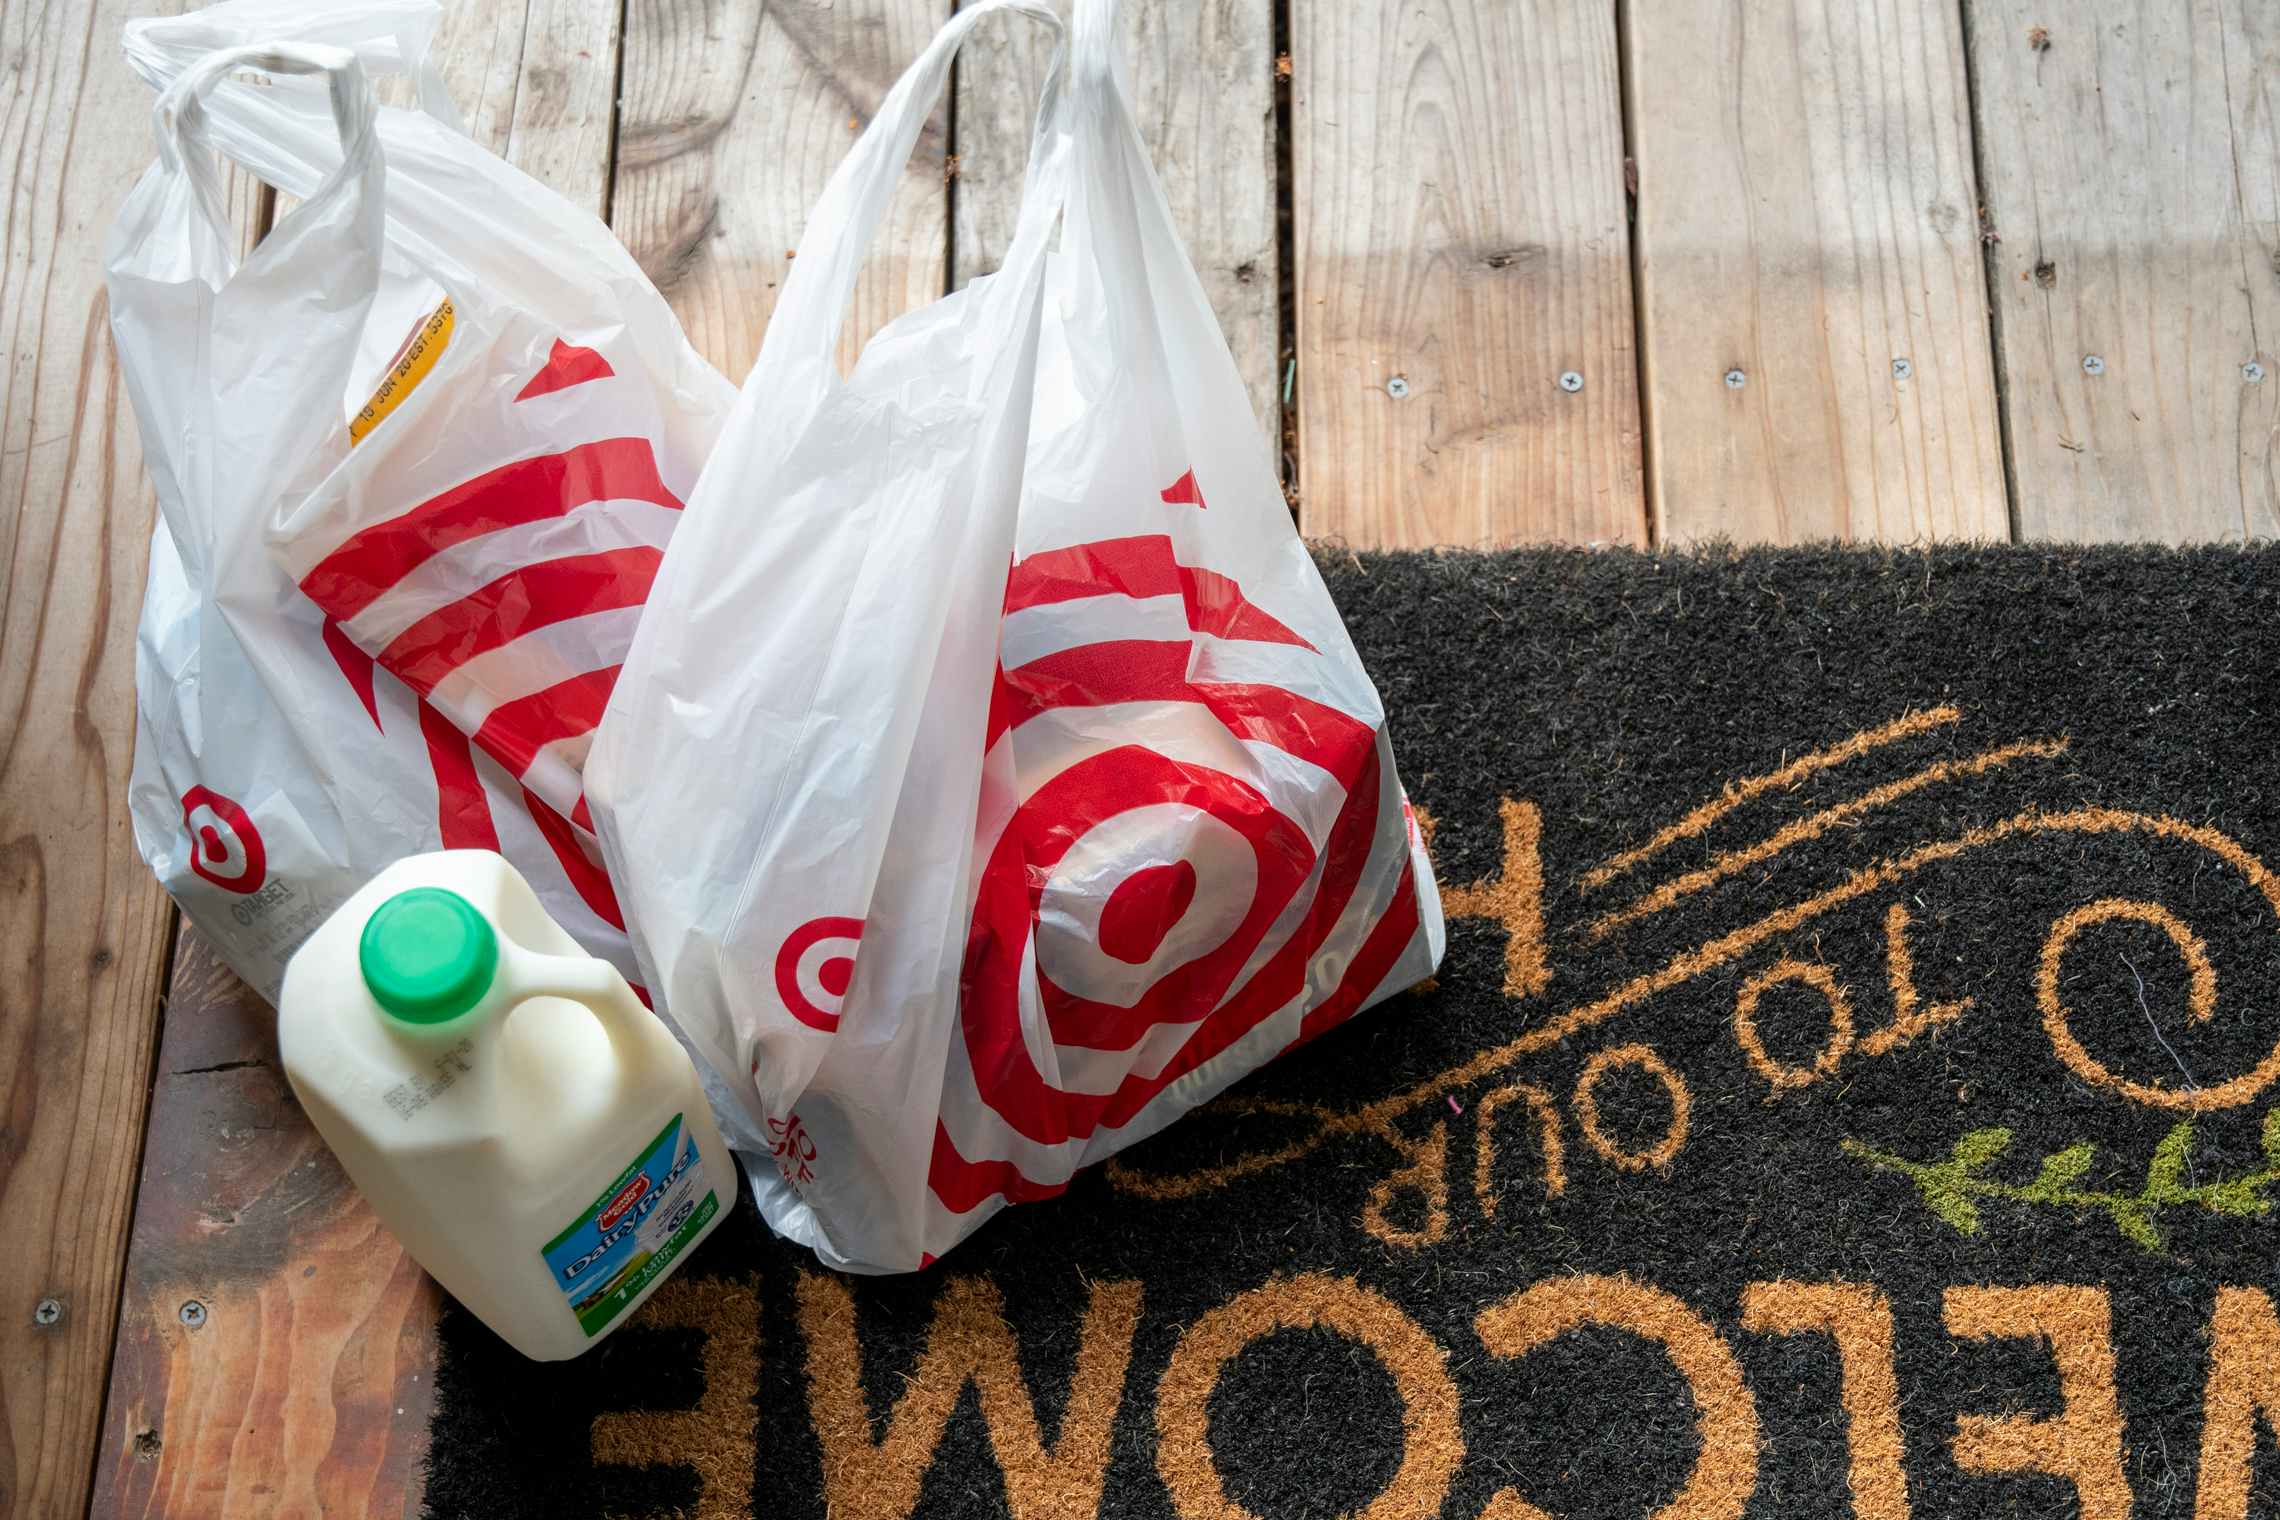 Target Shipt grocery delivery sitting on a doormat.